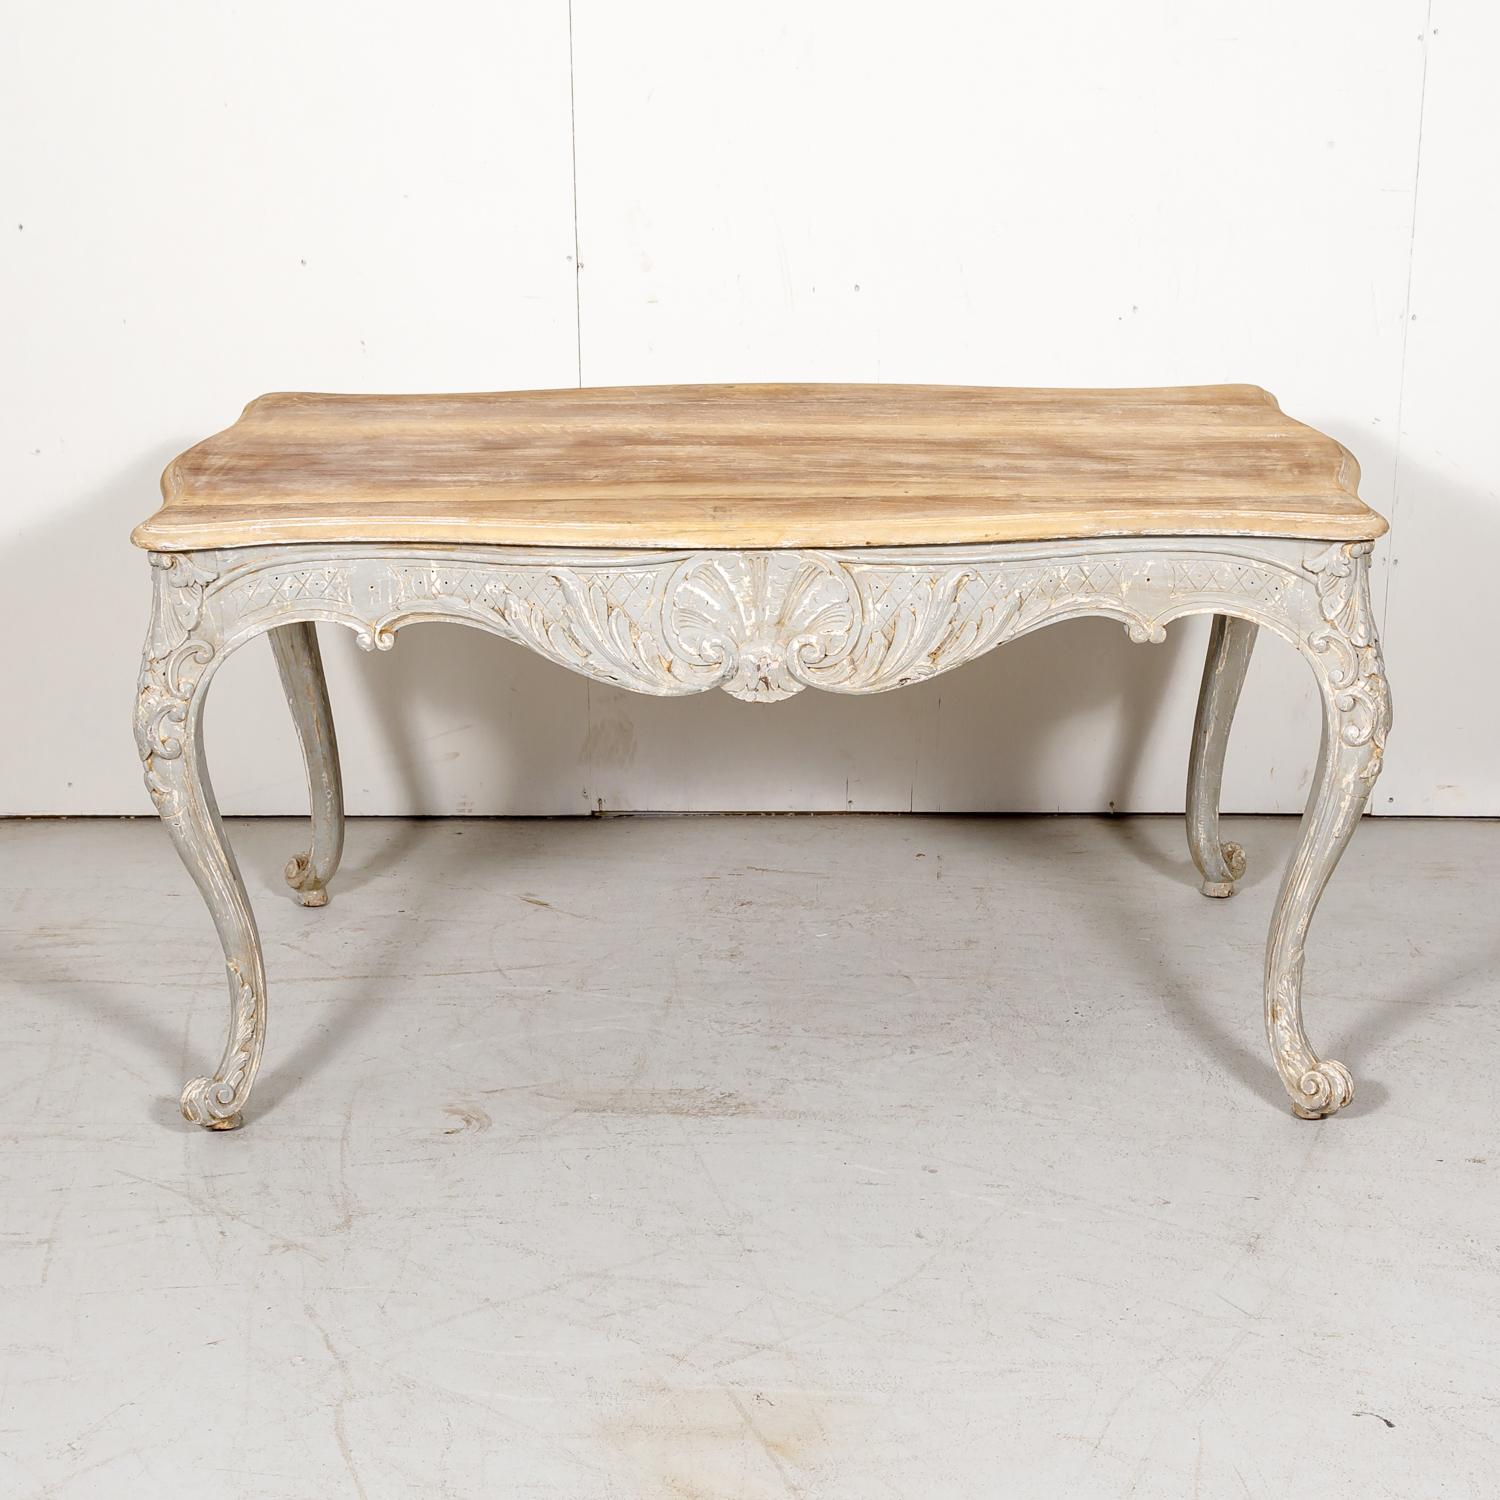 19th century French Country Louis XV style carved and painted solid old growth French oak table handcrafted near Toulouse, circa 1890s. This lovely French table features a bleached and waxed serpentine top above a beautifully carved scalloped and